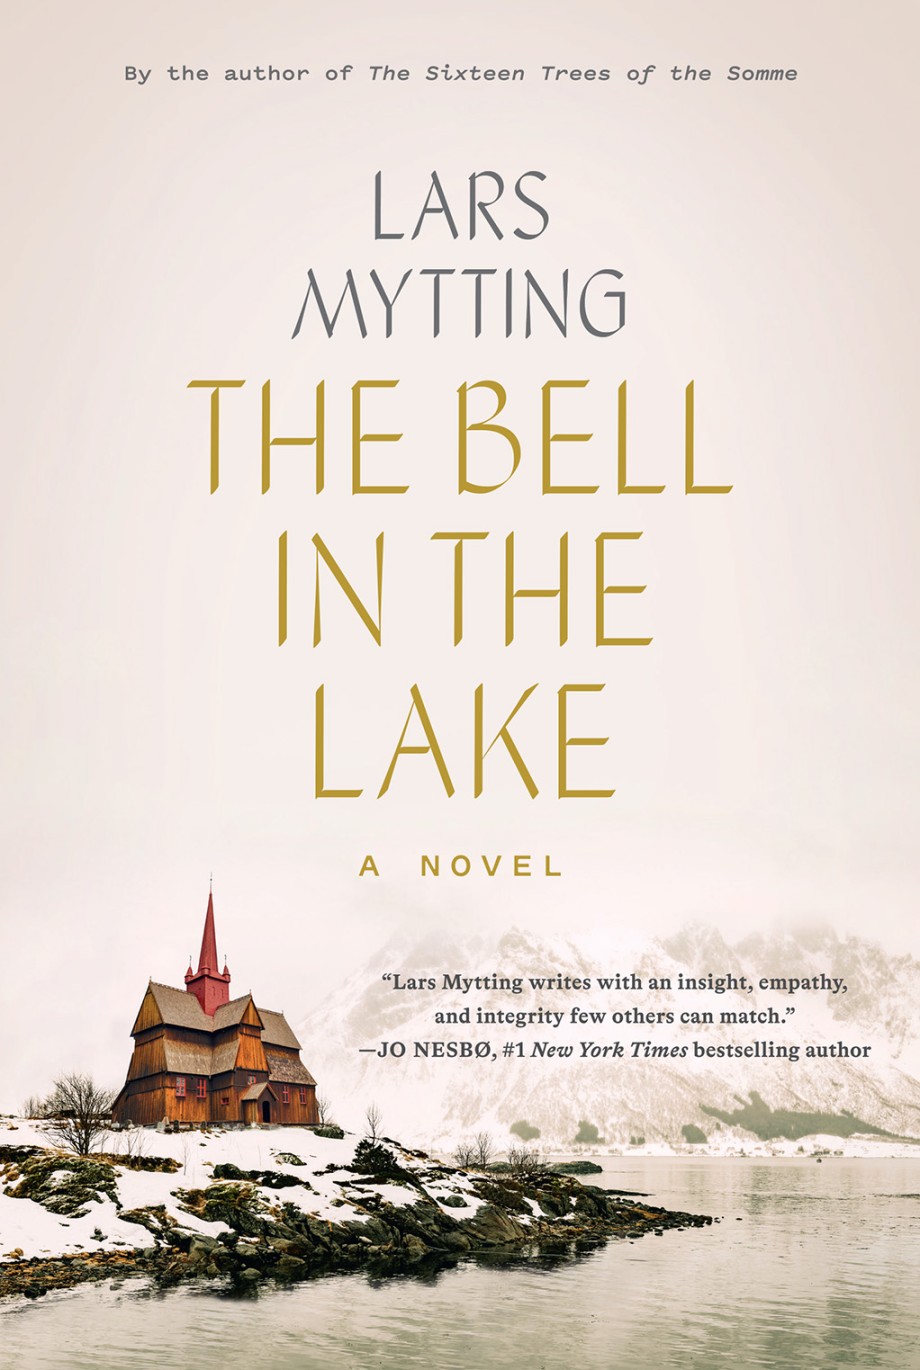 Bell in the Lake A Novel